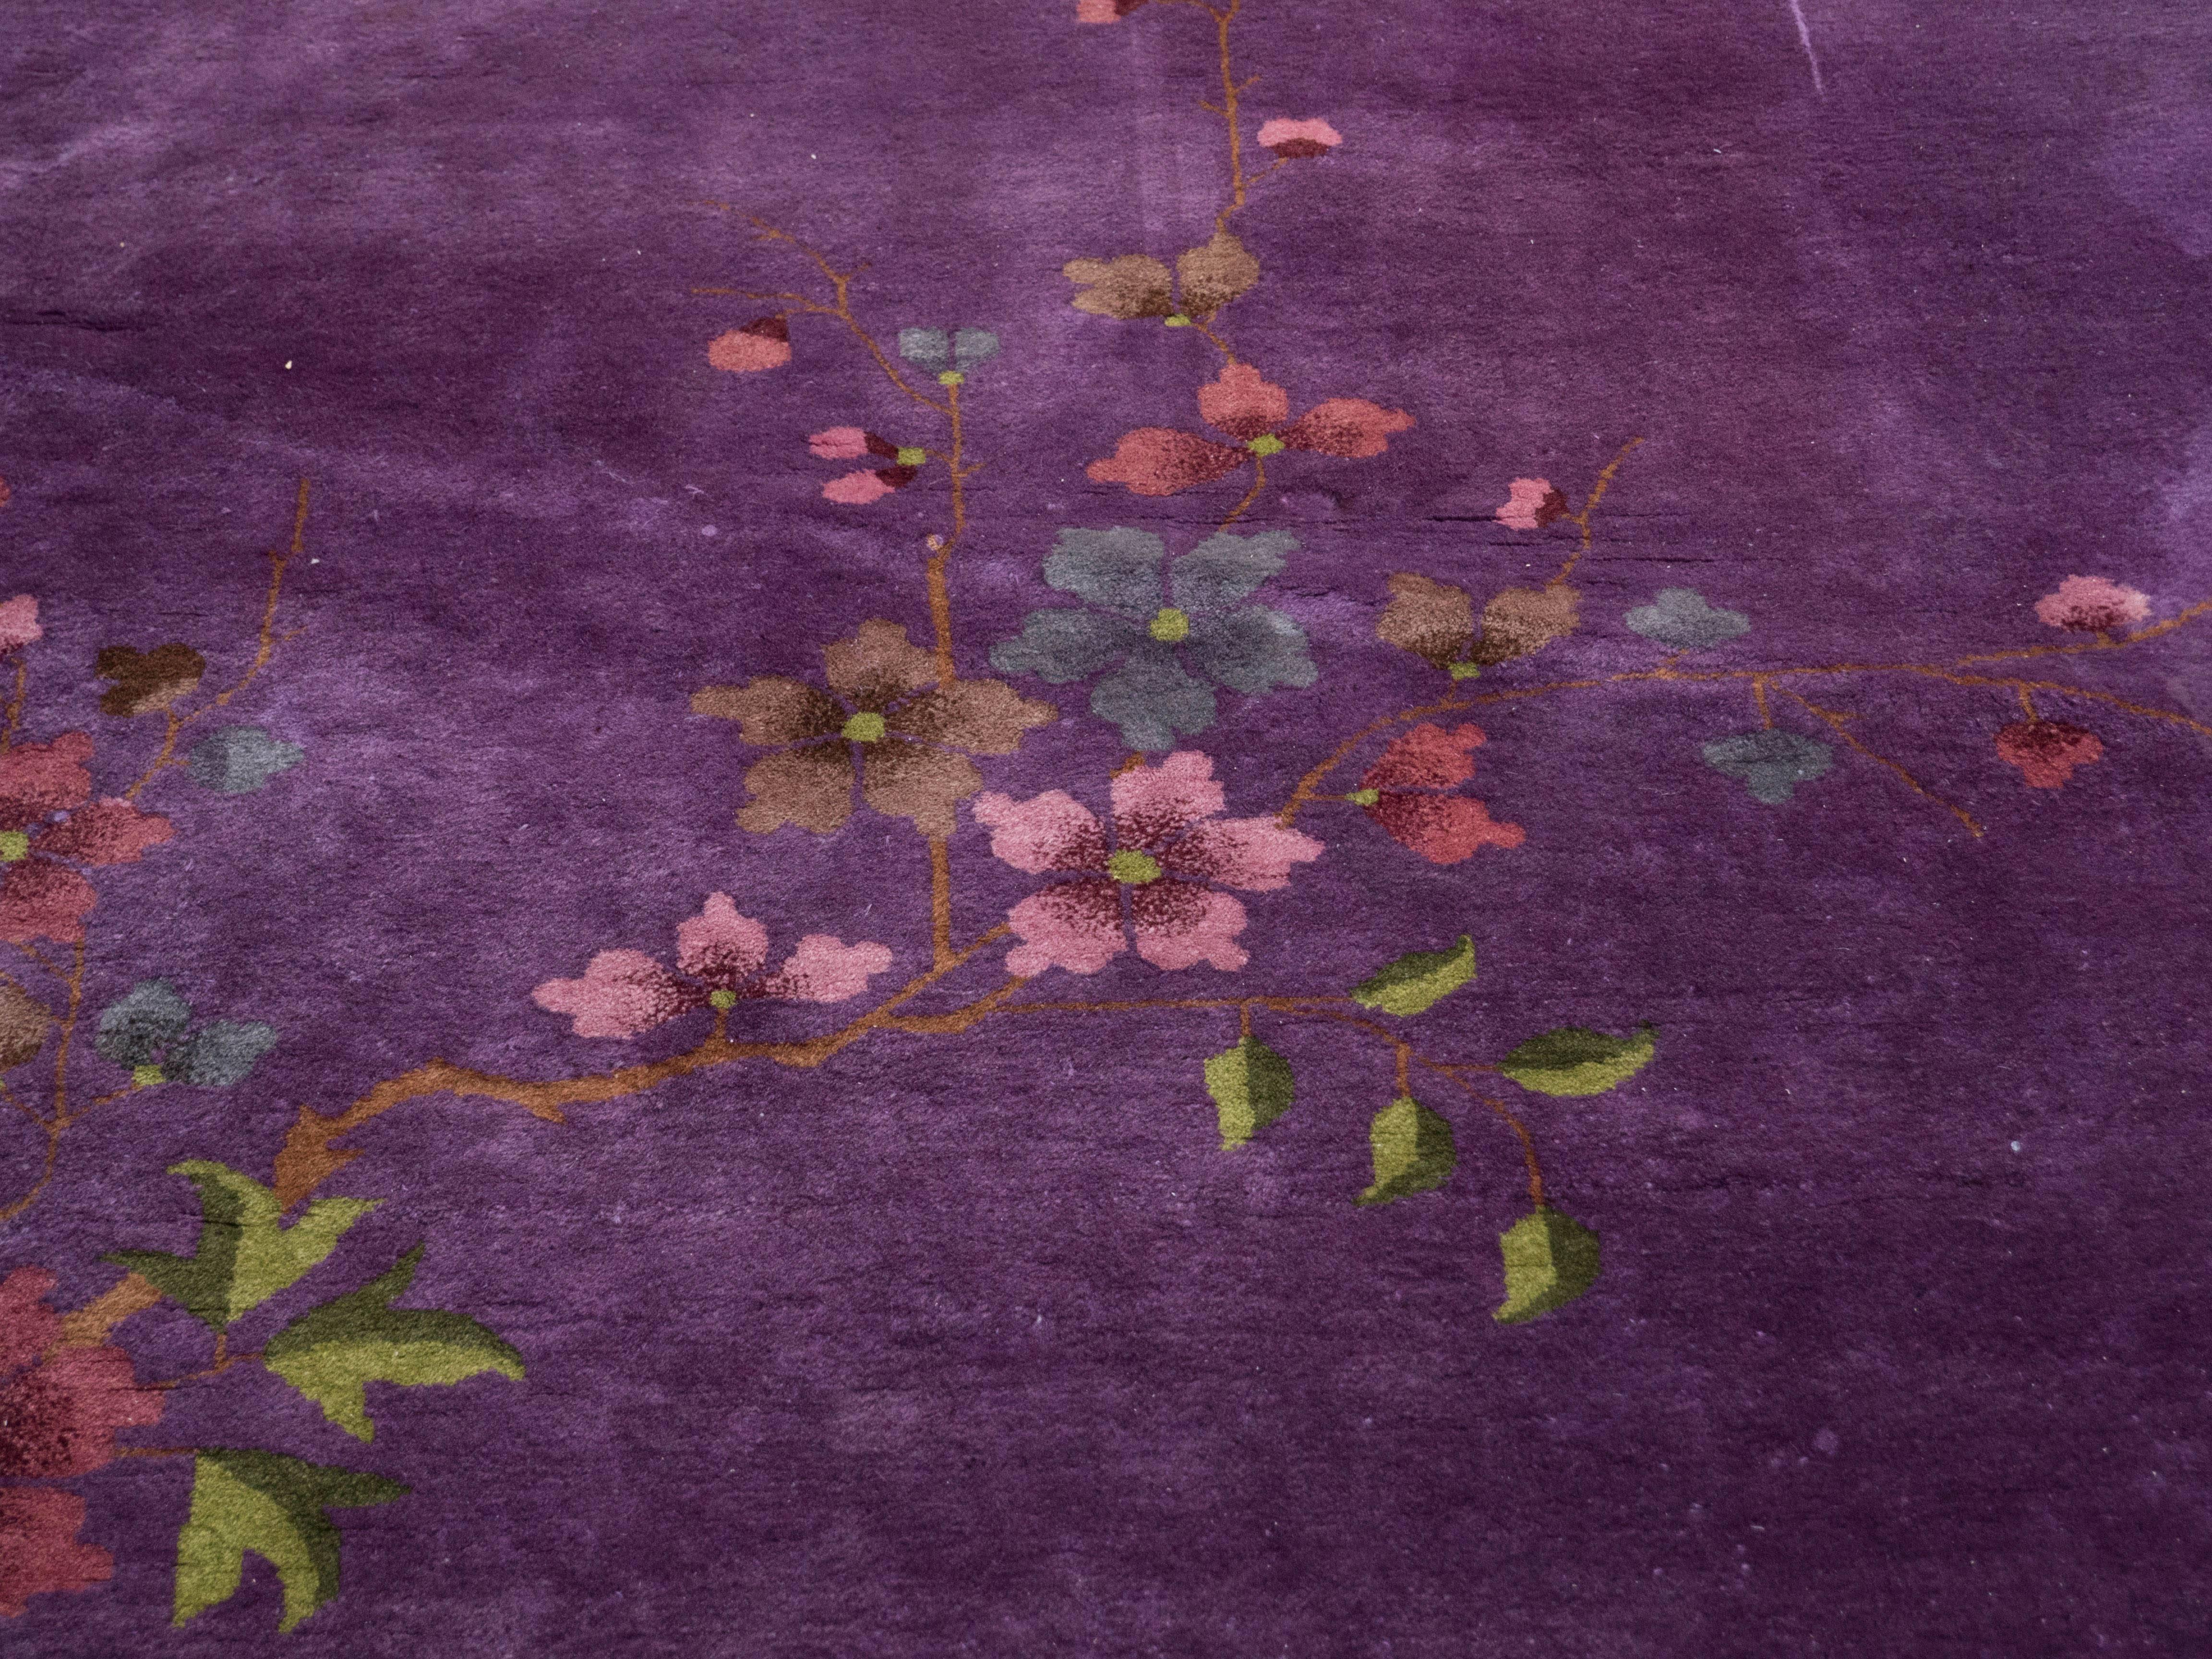 Woven Exotic Chinese Art Deco Rug in Shades of Lilac Purple and Mauve Wool, circa 1925